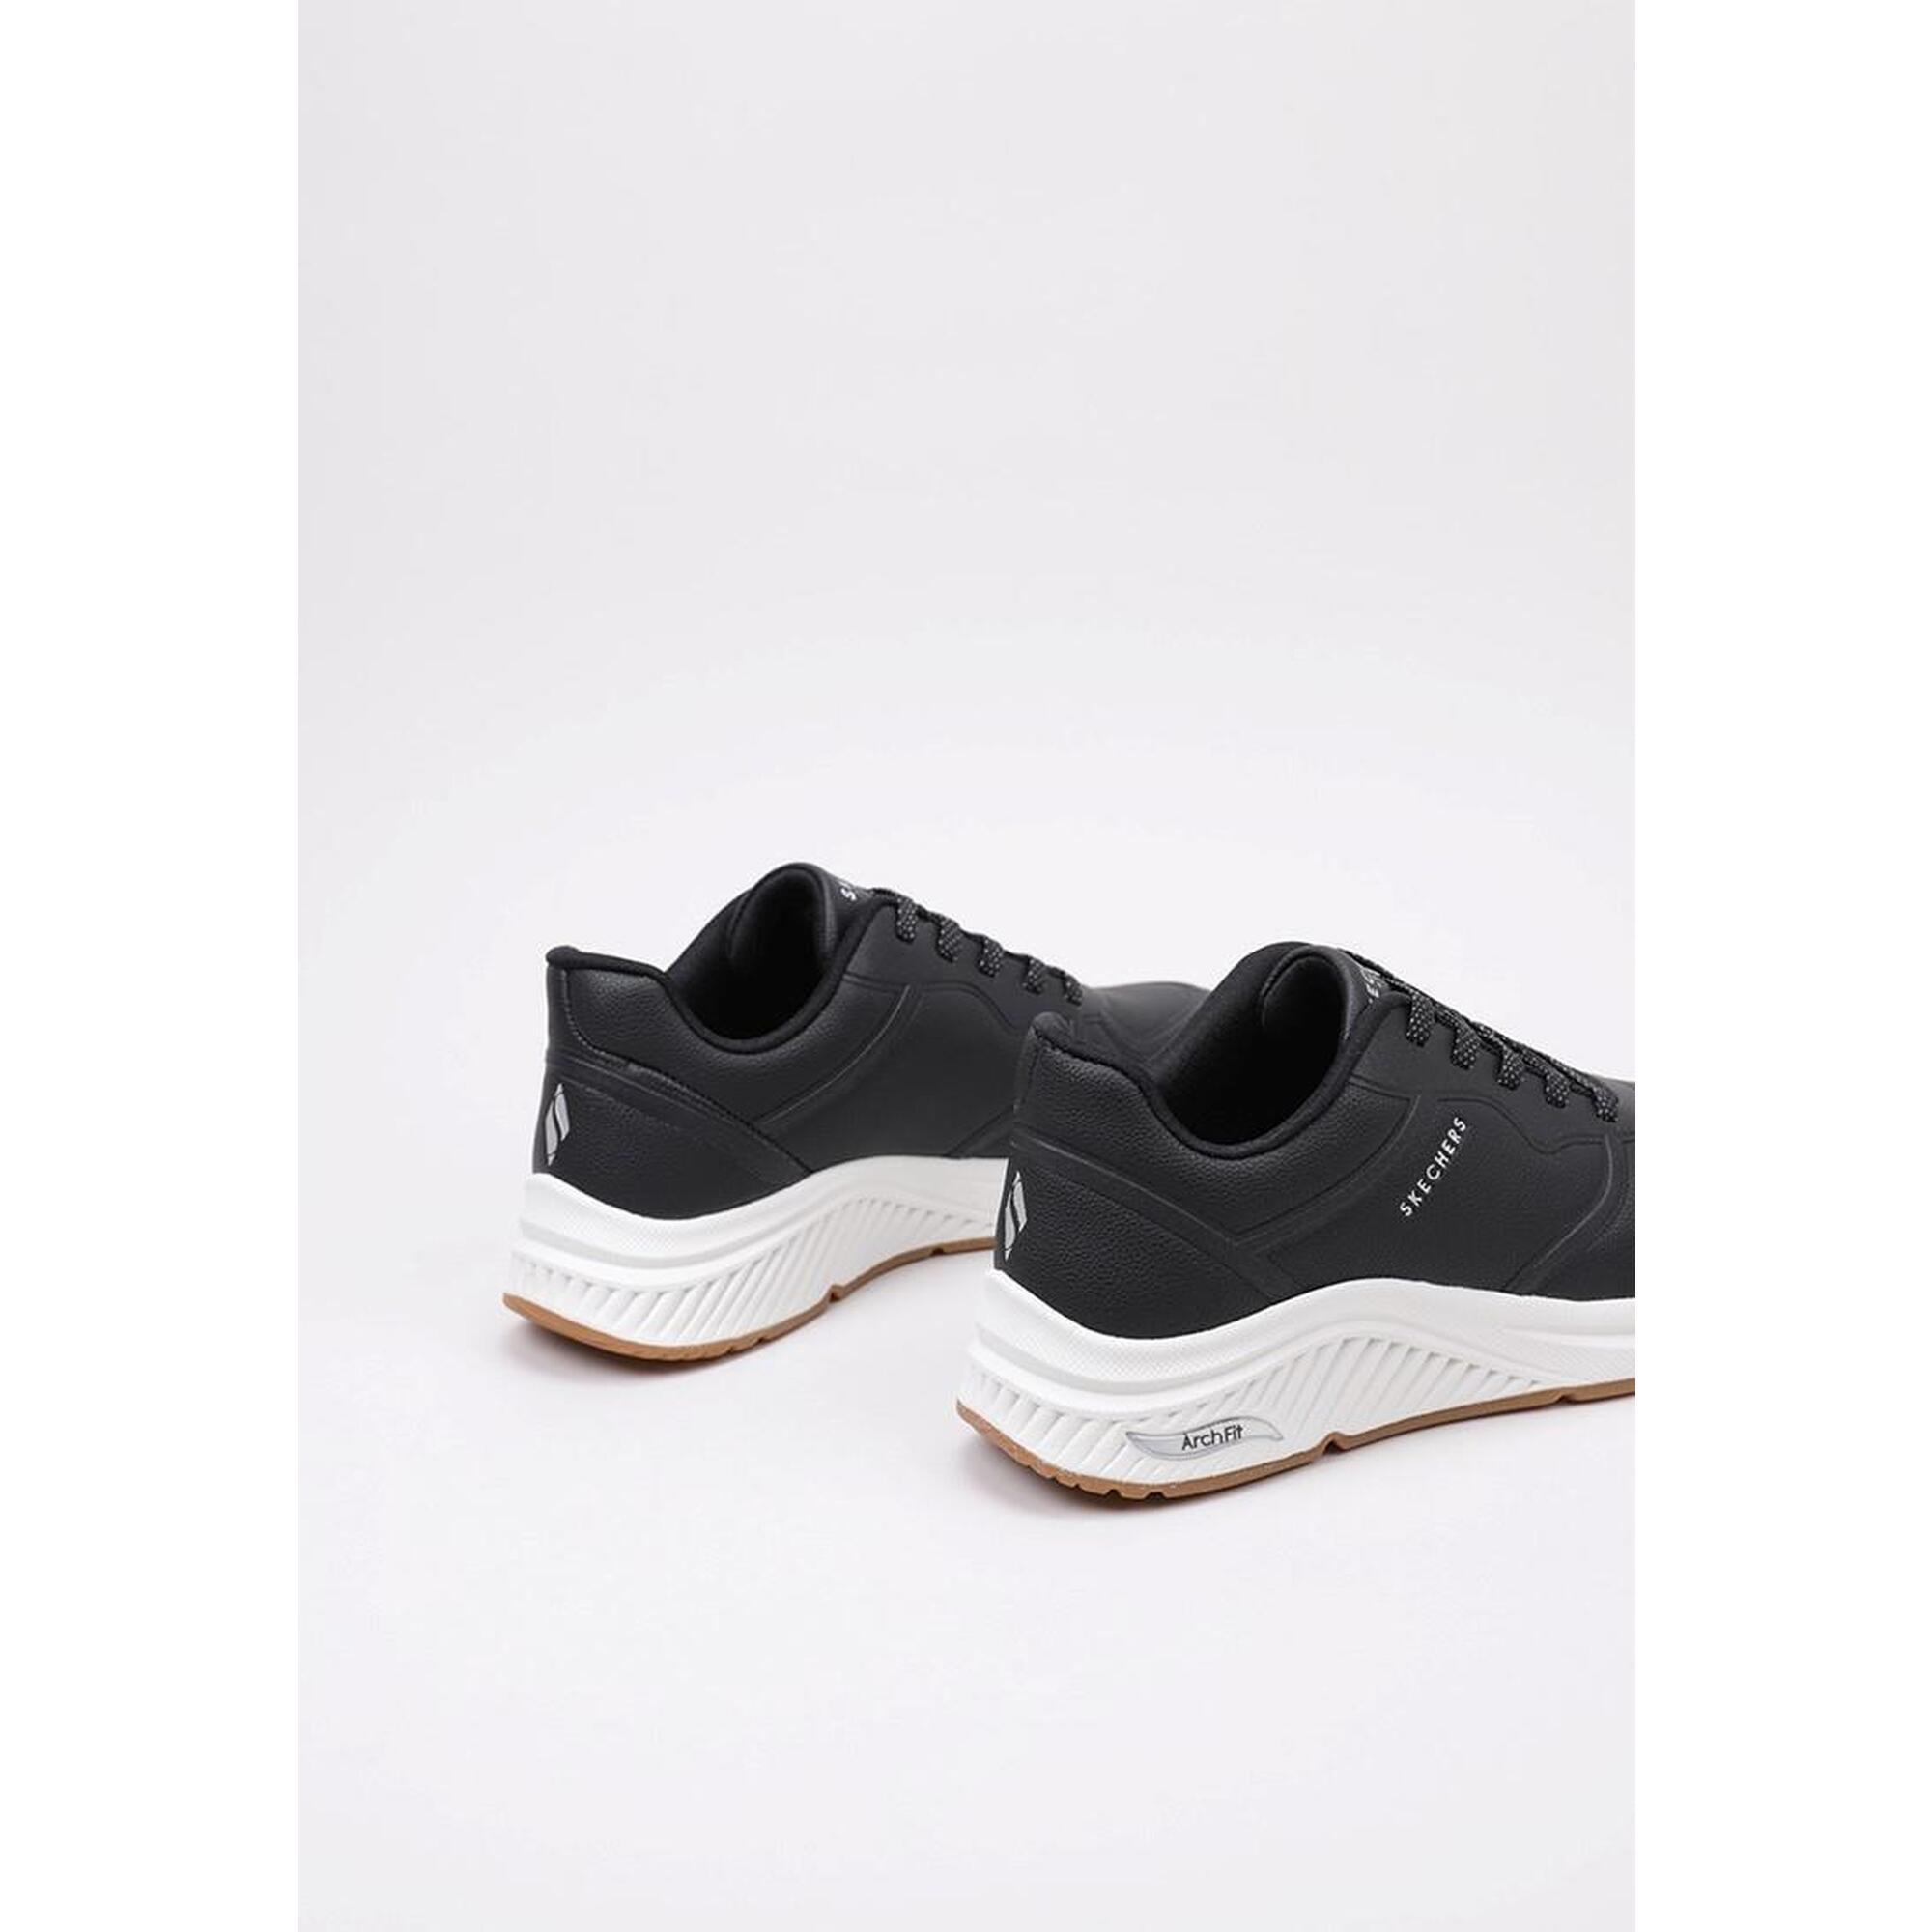 Zapatillas Deportivas Mujer Skechers ARCH FIT S-MILES - MILE MAKERS Negro